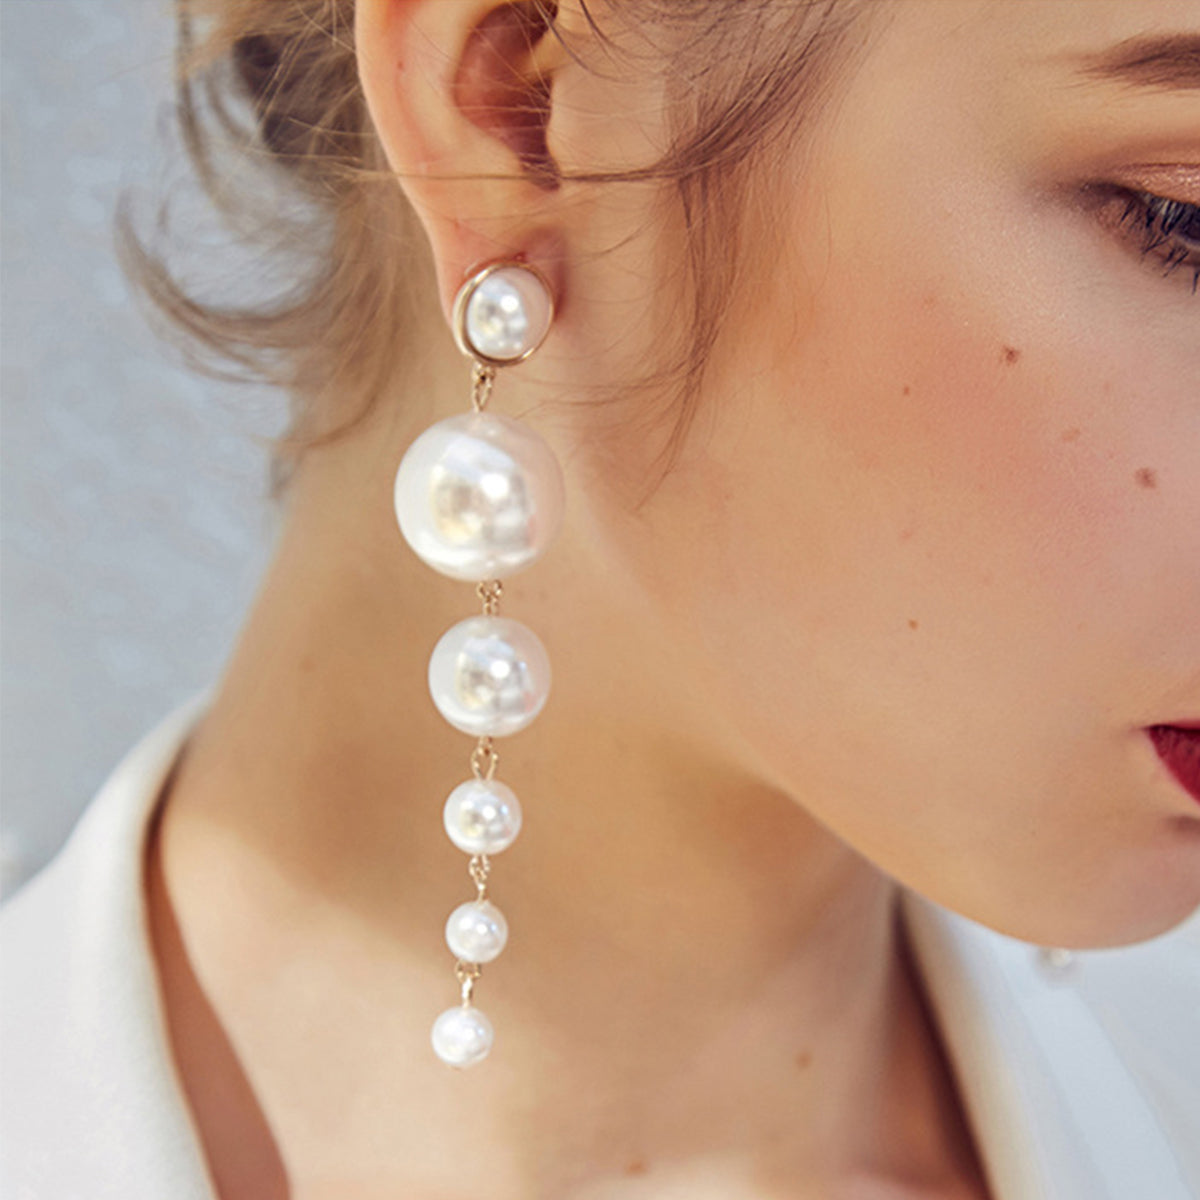 Show Off Your Earrings With These 5 Tips